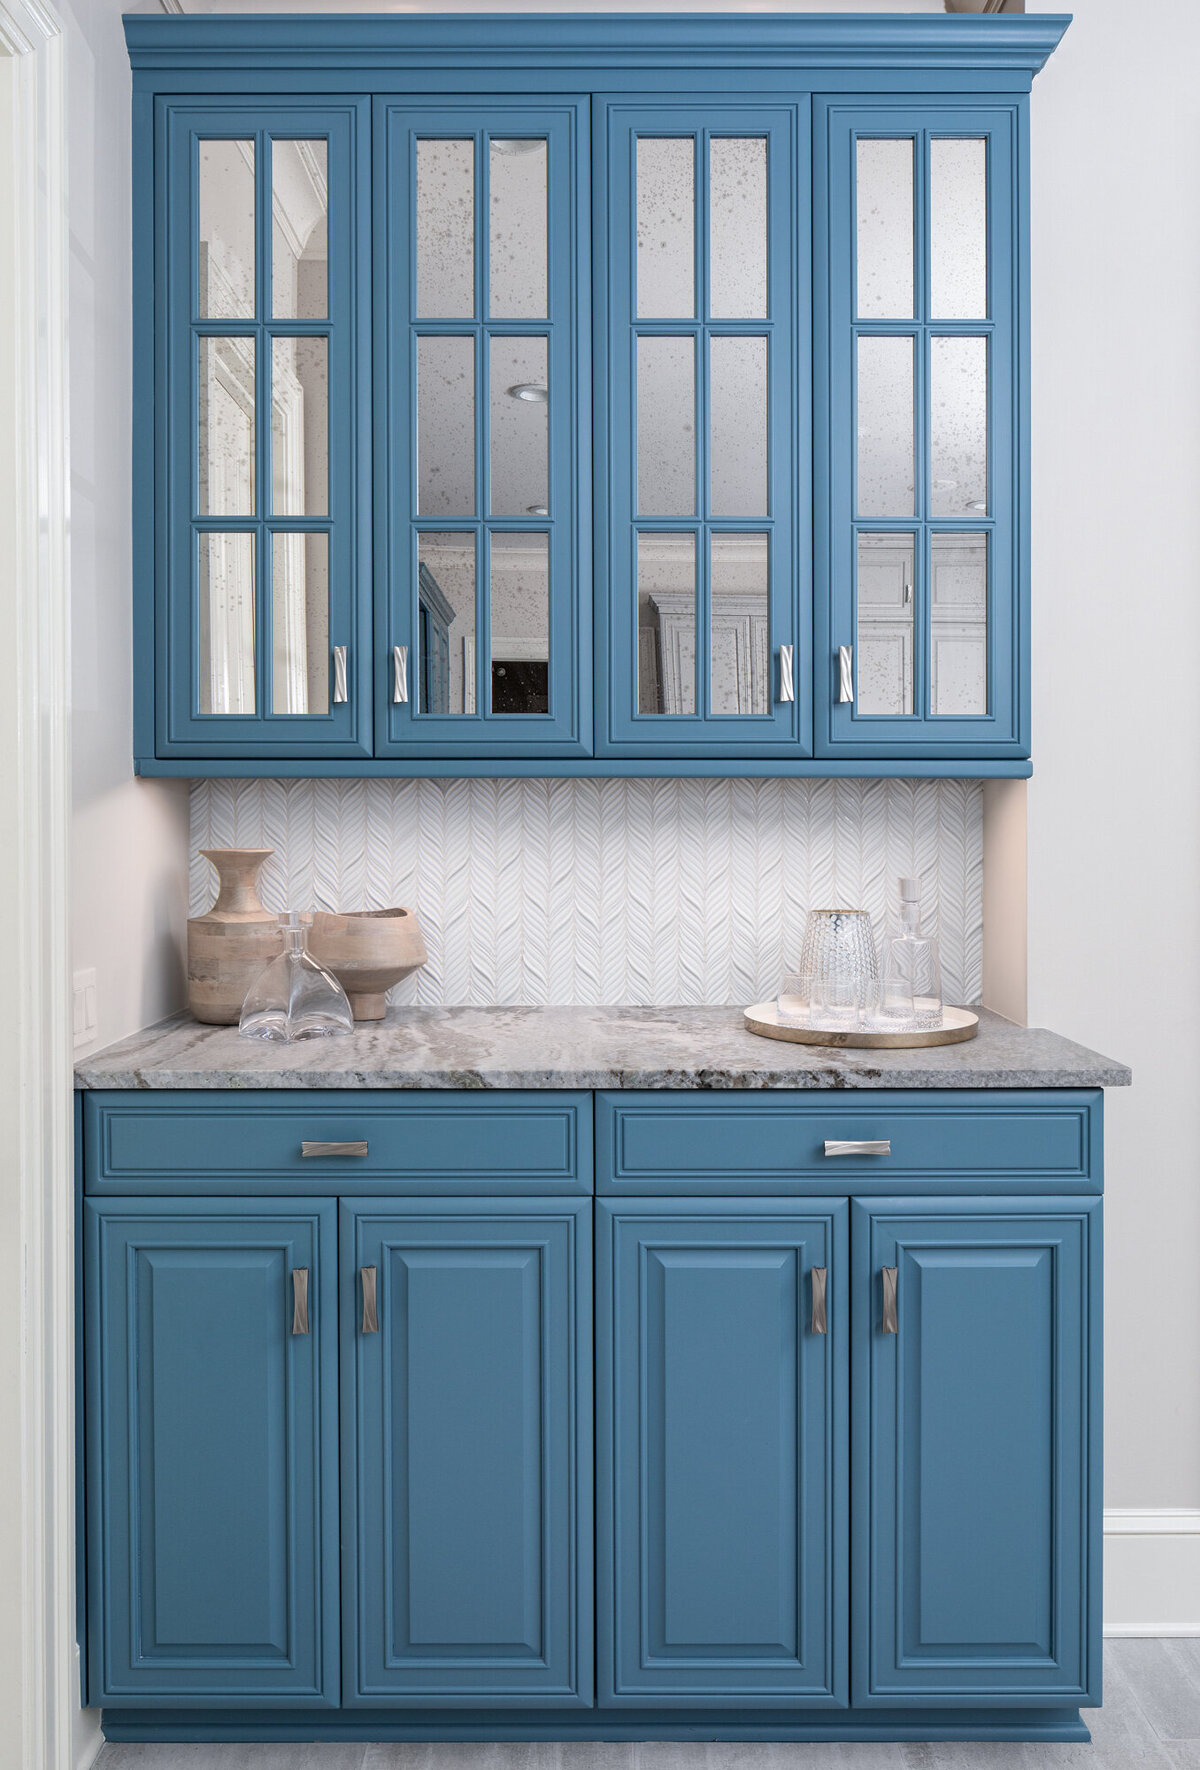 bar in kitchen with blue cabinetry